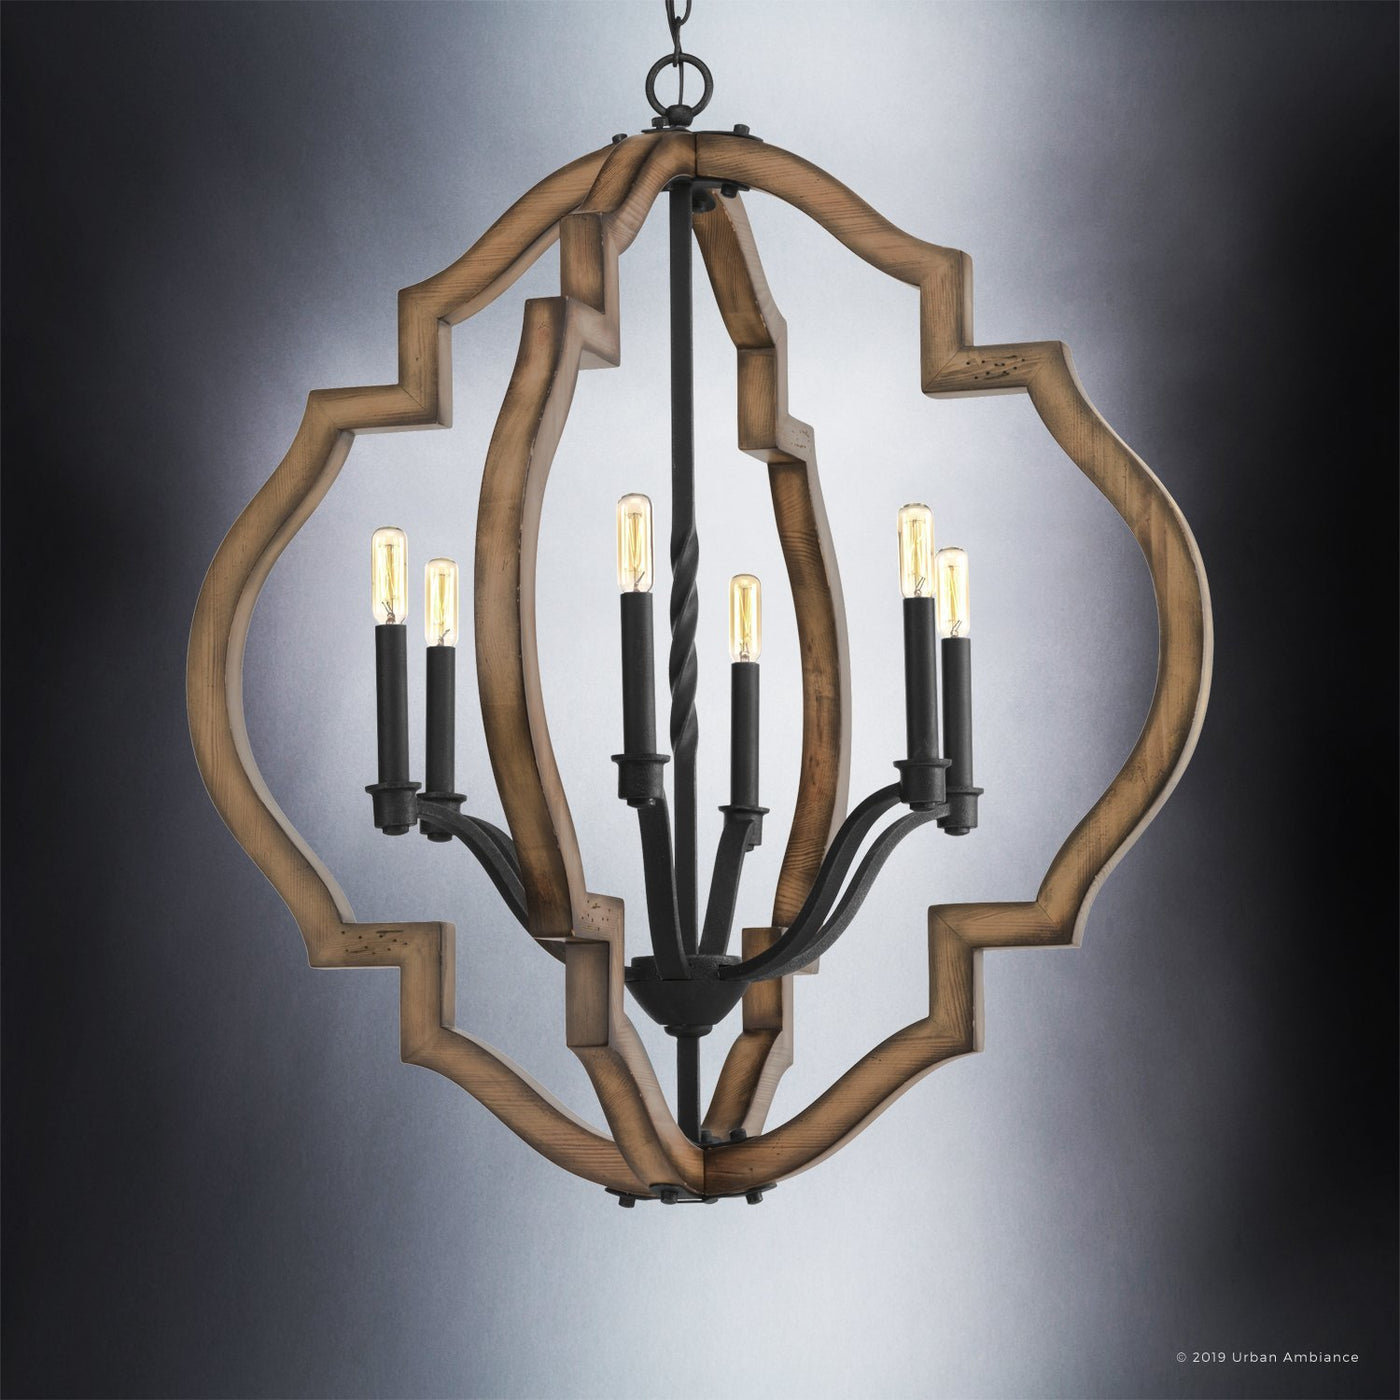 Uhp3031 Rustic Chandelier 32 1 2 X 30